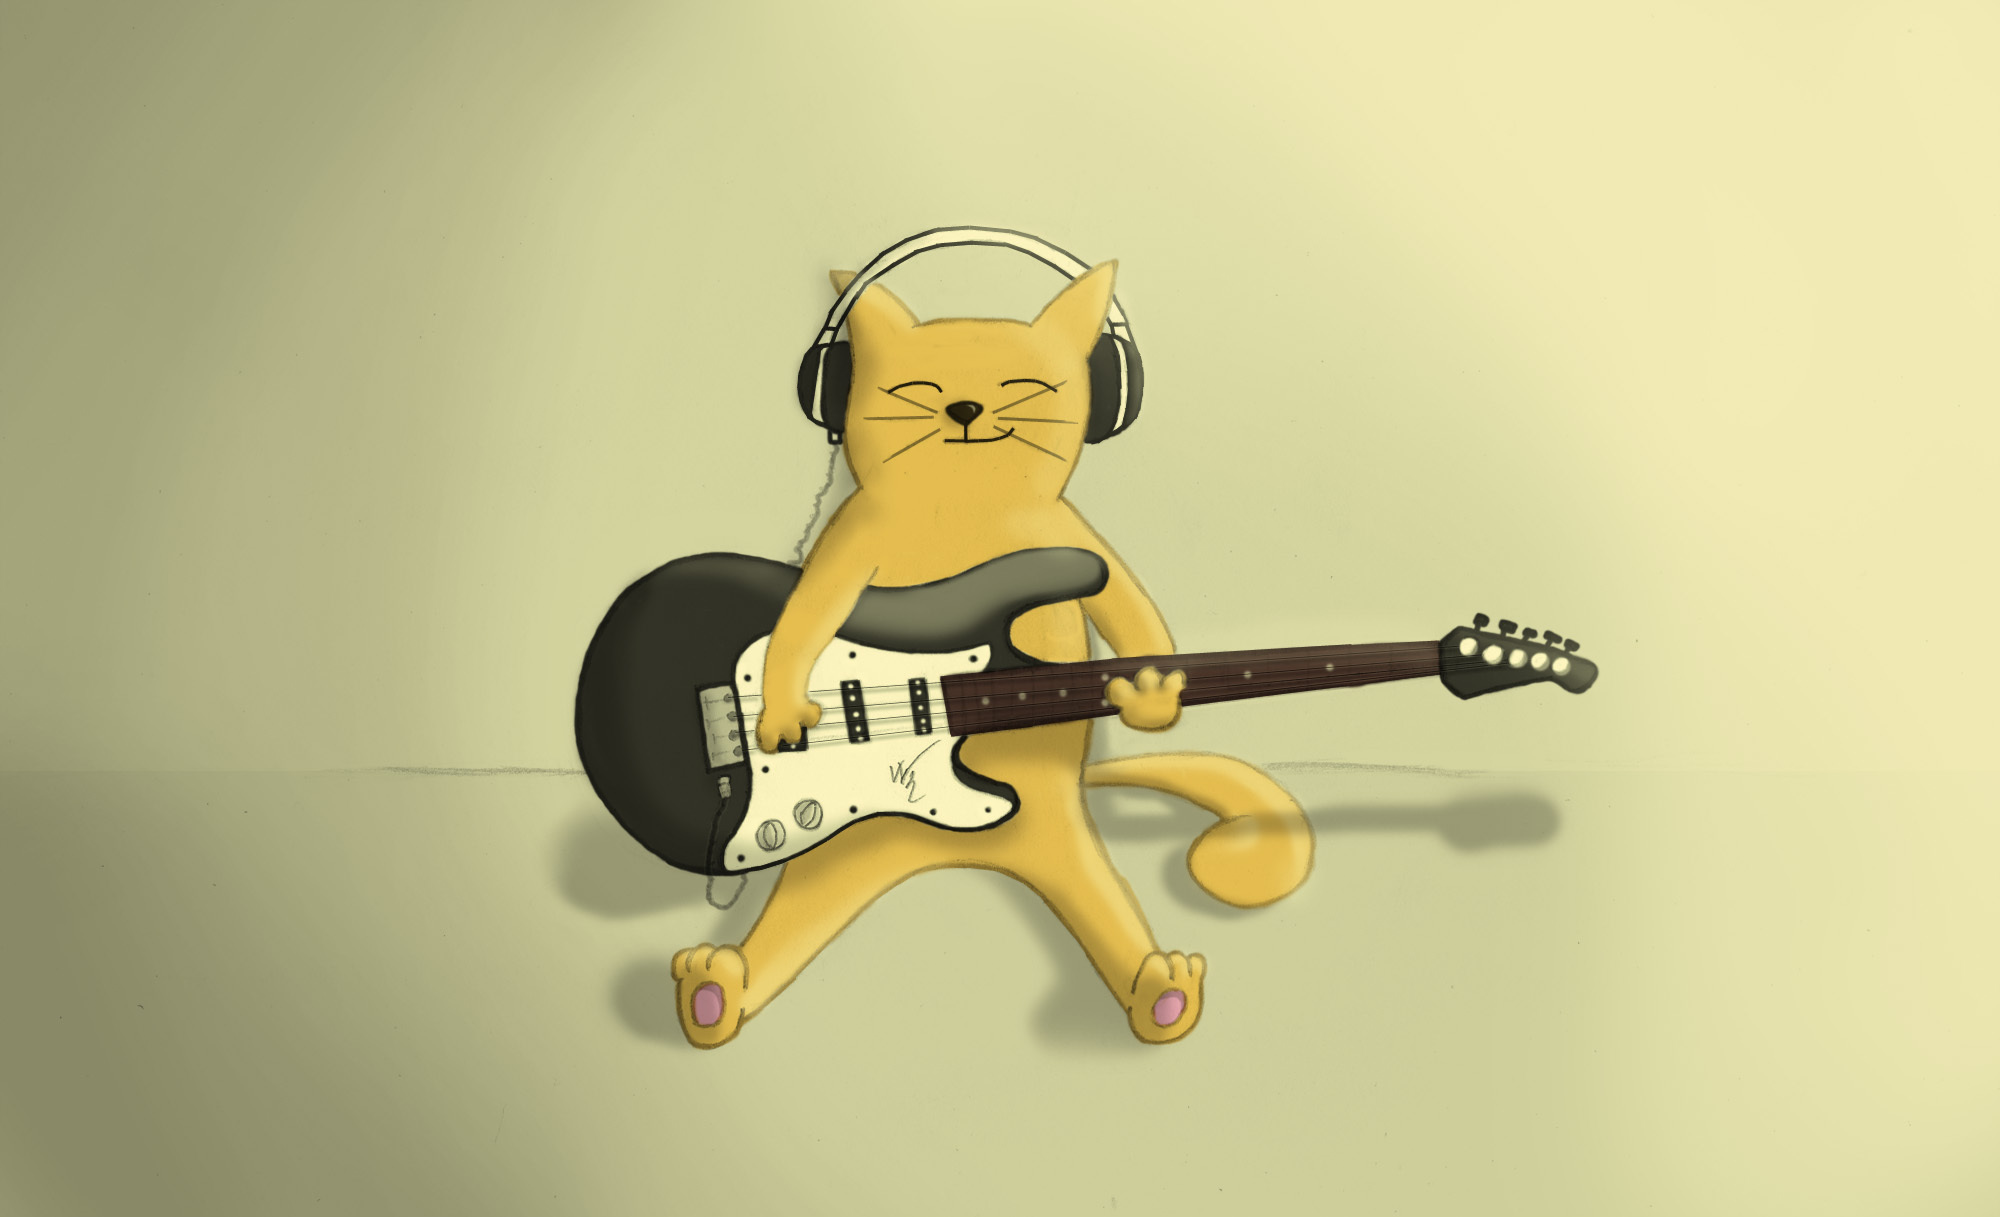 Cat with guitar wallpapers and images - wallpapers ...